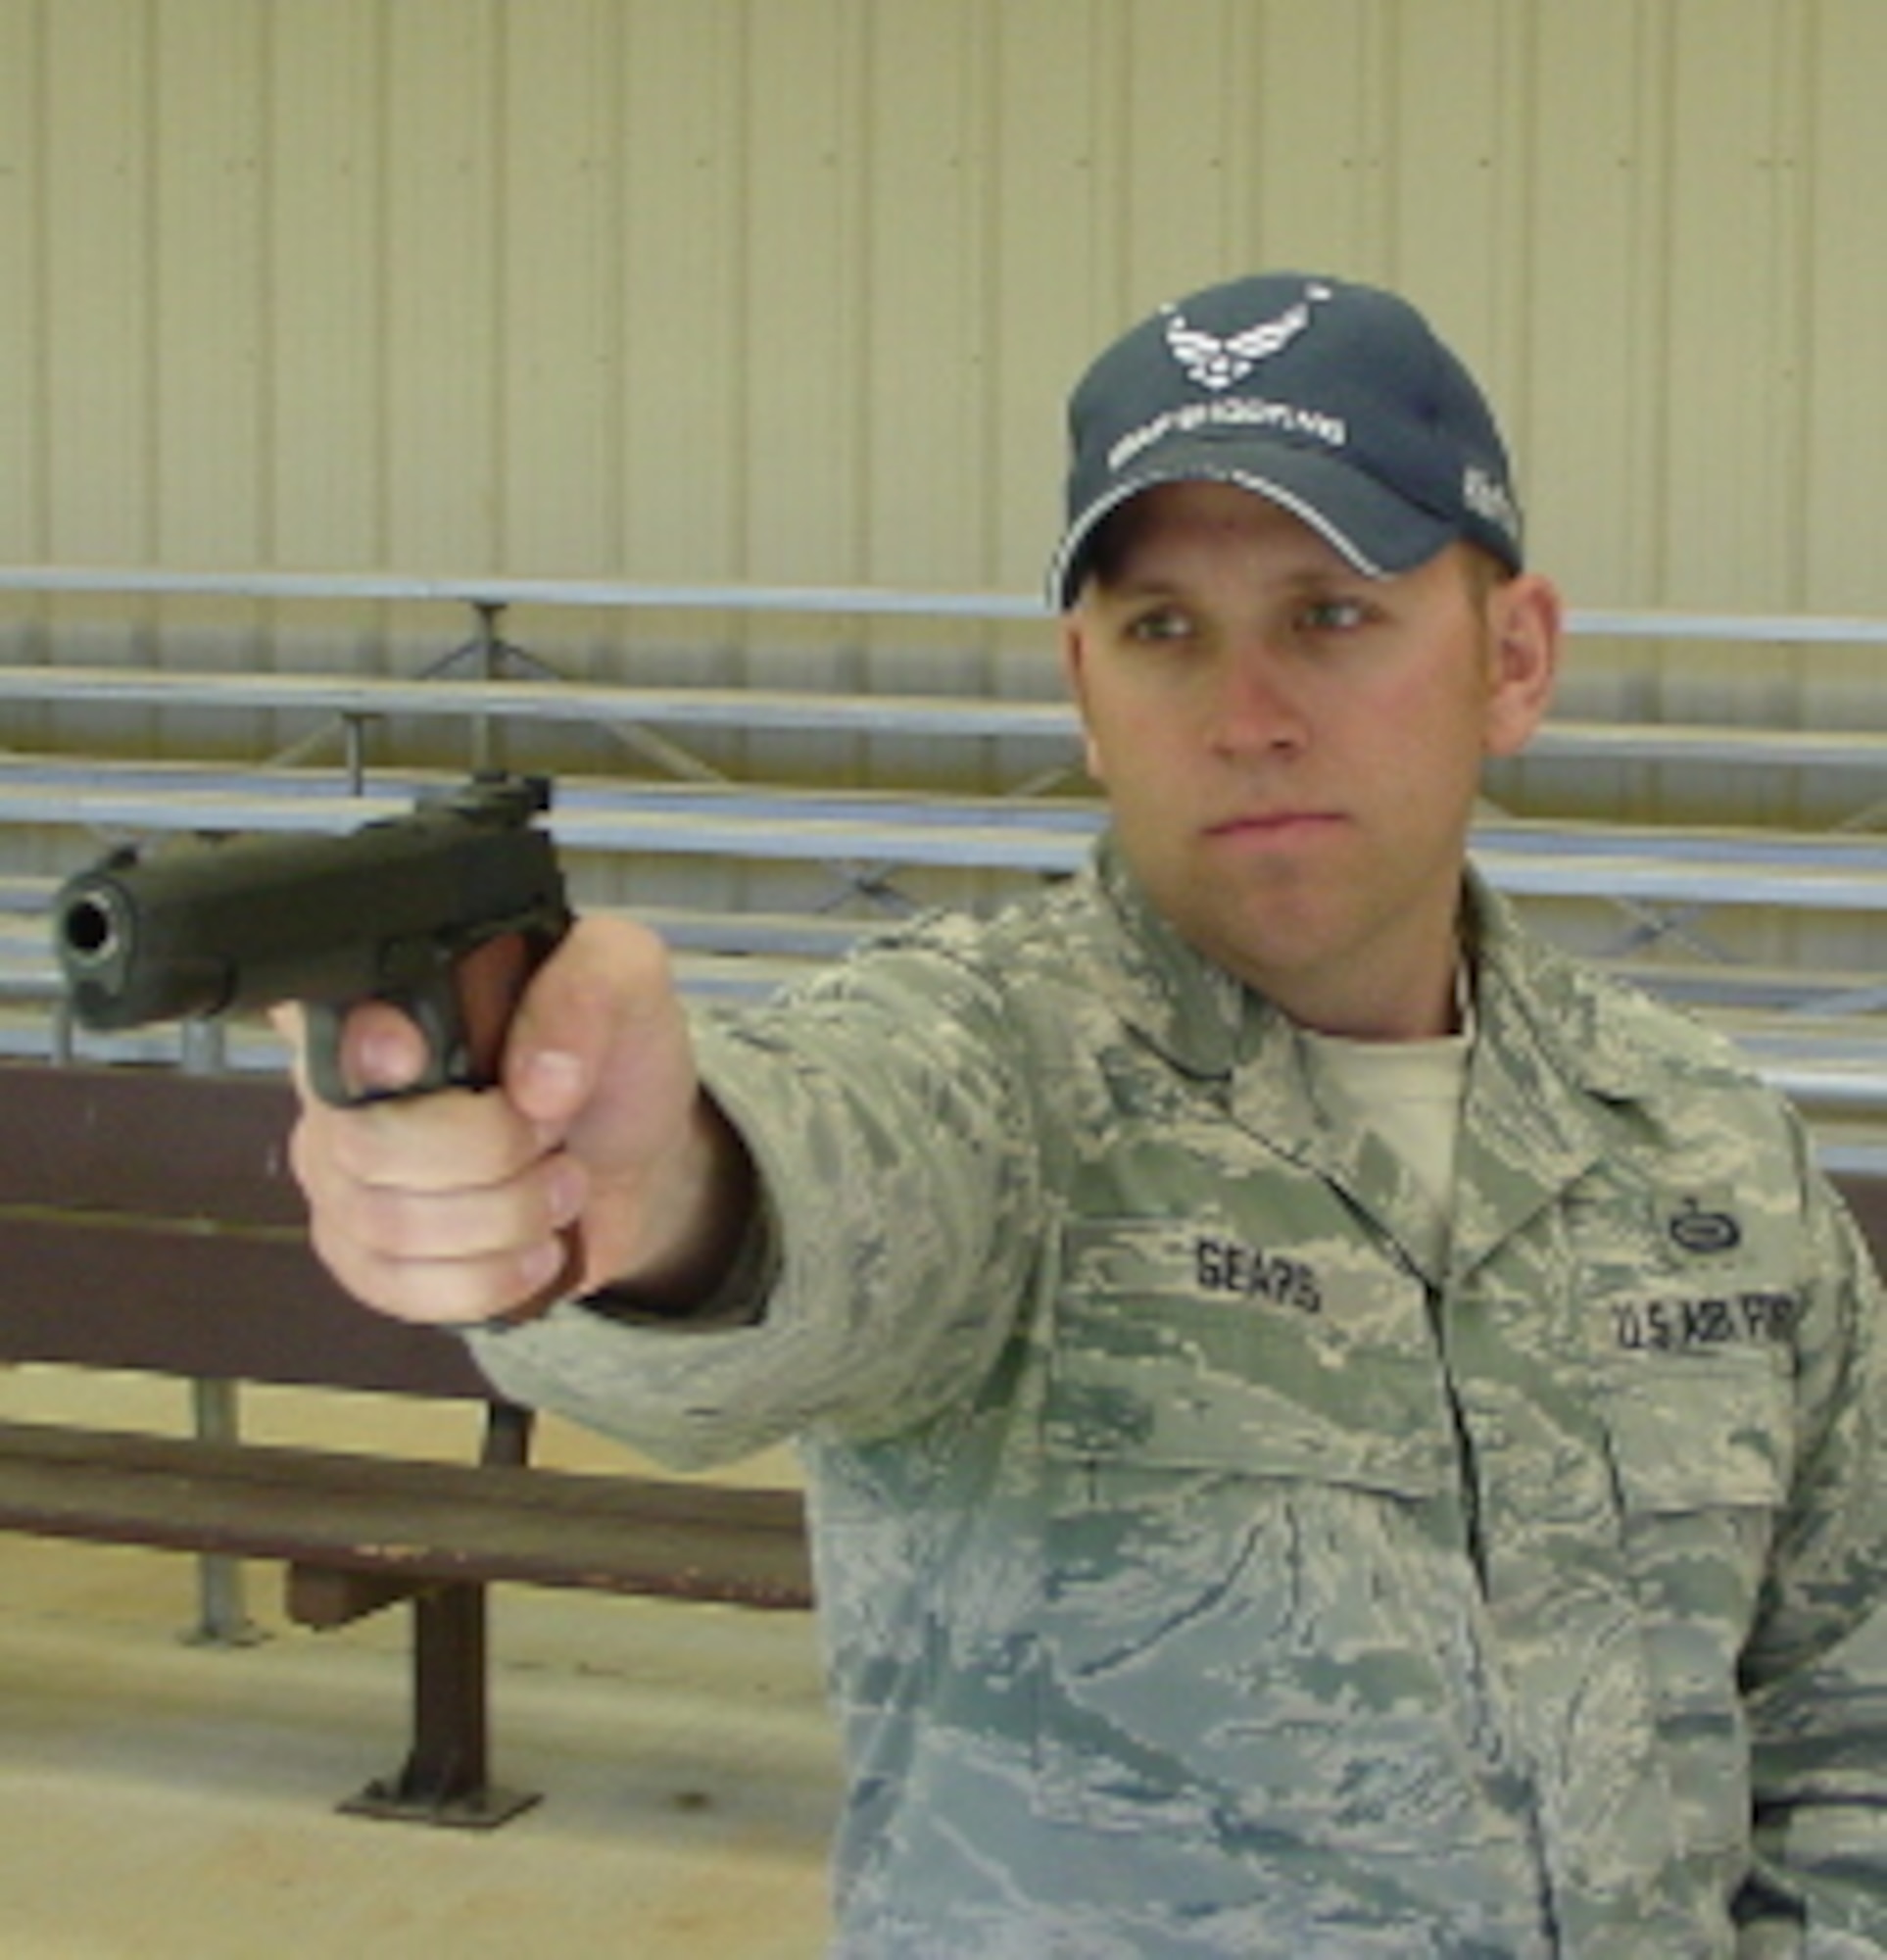 Staff Sgt. Terrence Sears, NCO in charge of the Air Force National Pistol Team, was the winner of the General Curtis LeMay Trophy, given to the top Air Force shooter at the National Pistol Championships in July 2014. (Courtesy photo)